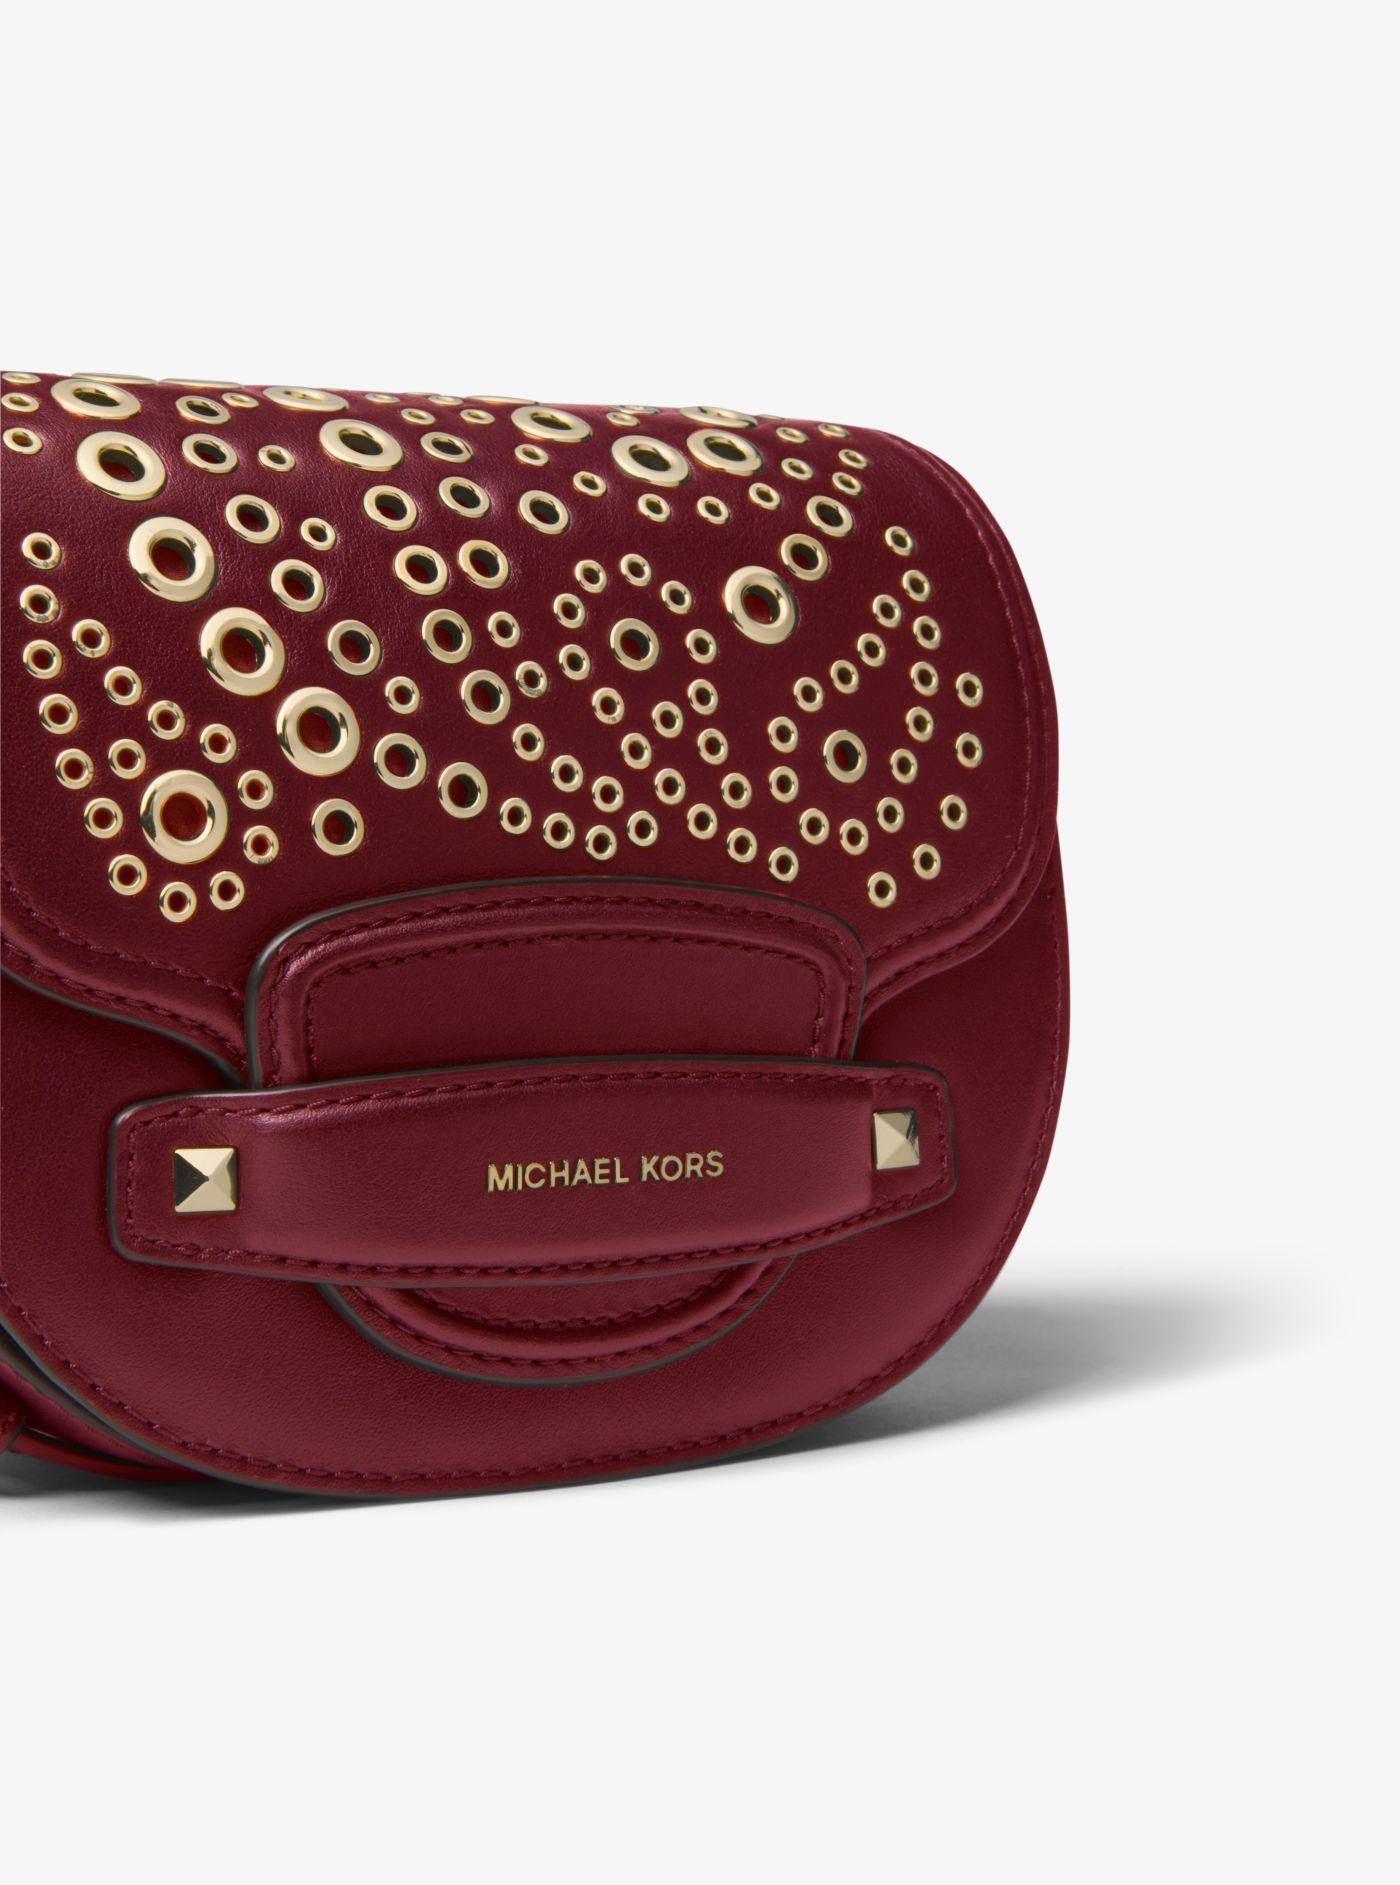 Michael Kors Cary Small Grommeted 